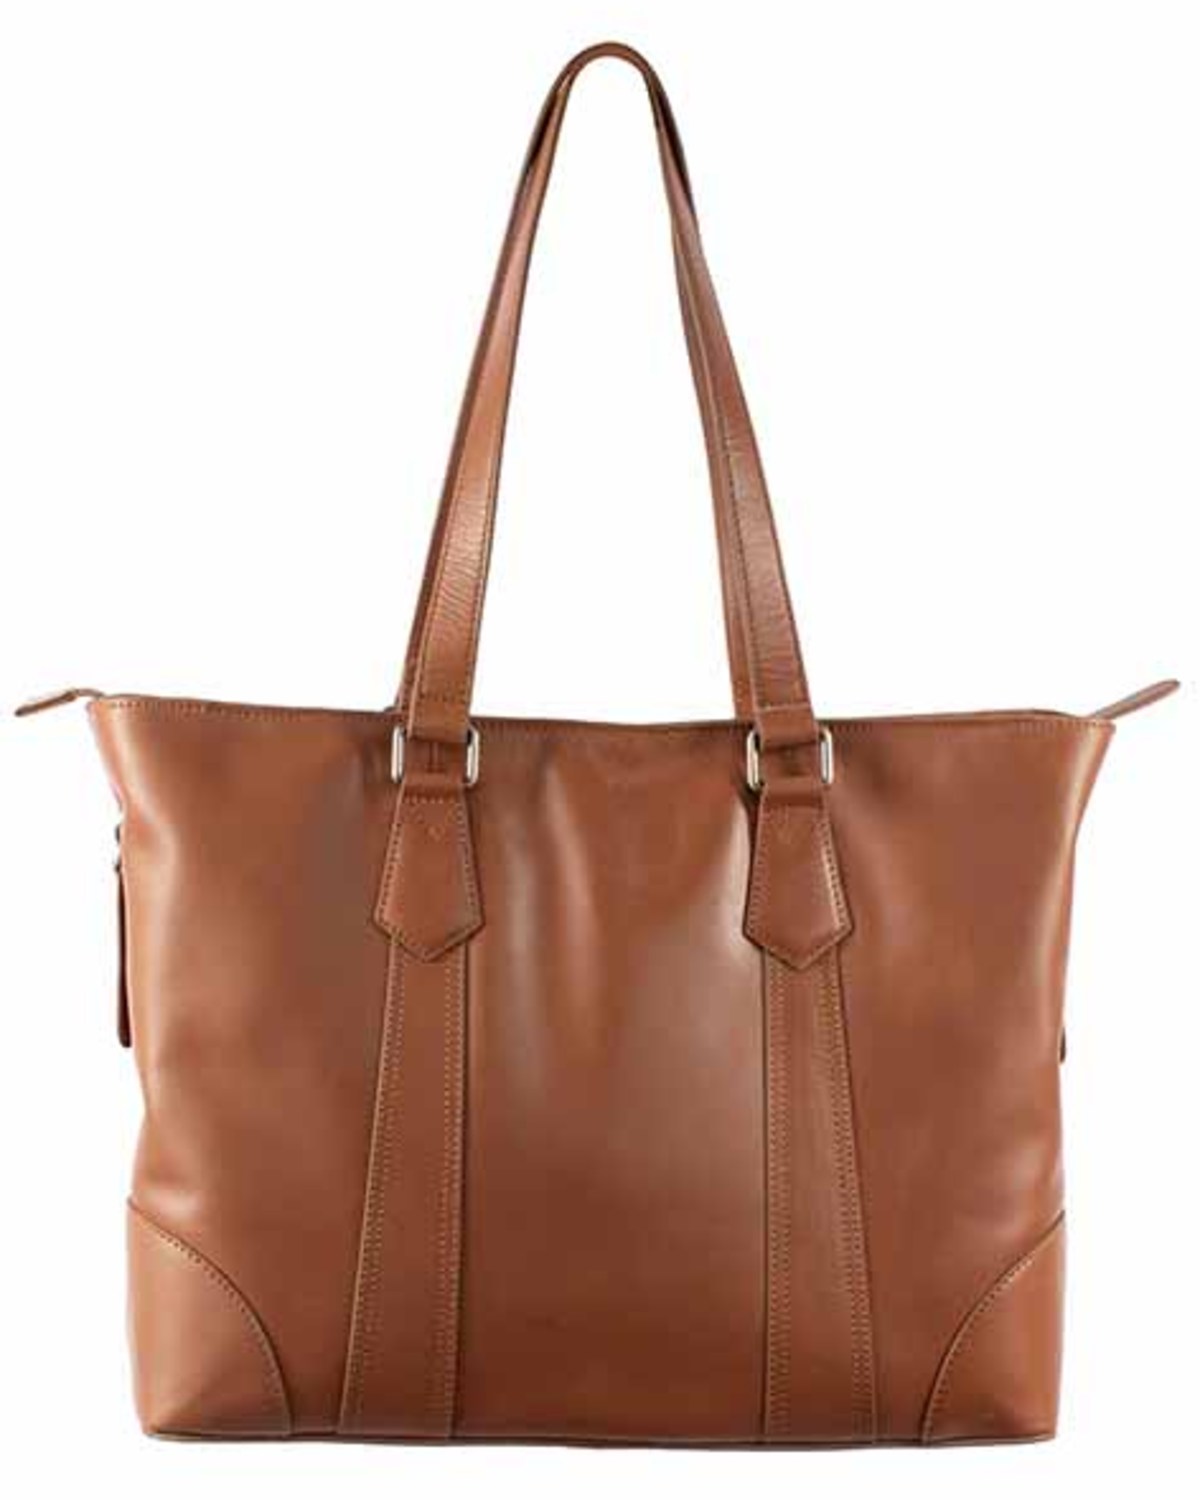 Scully Women's Concealed Carry Handbag